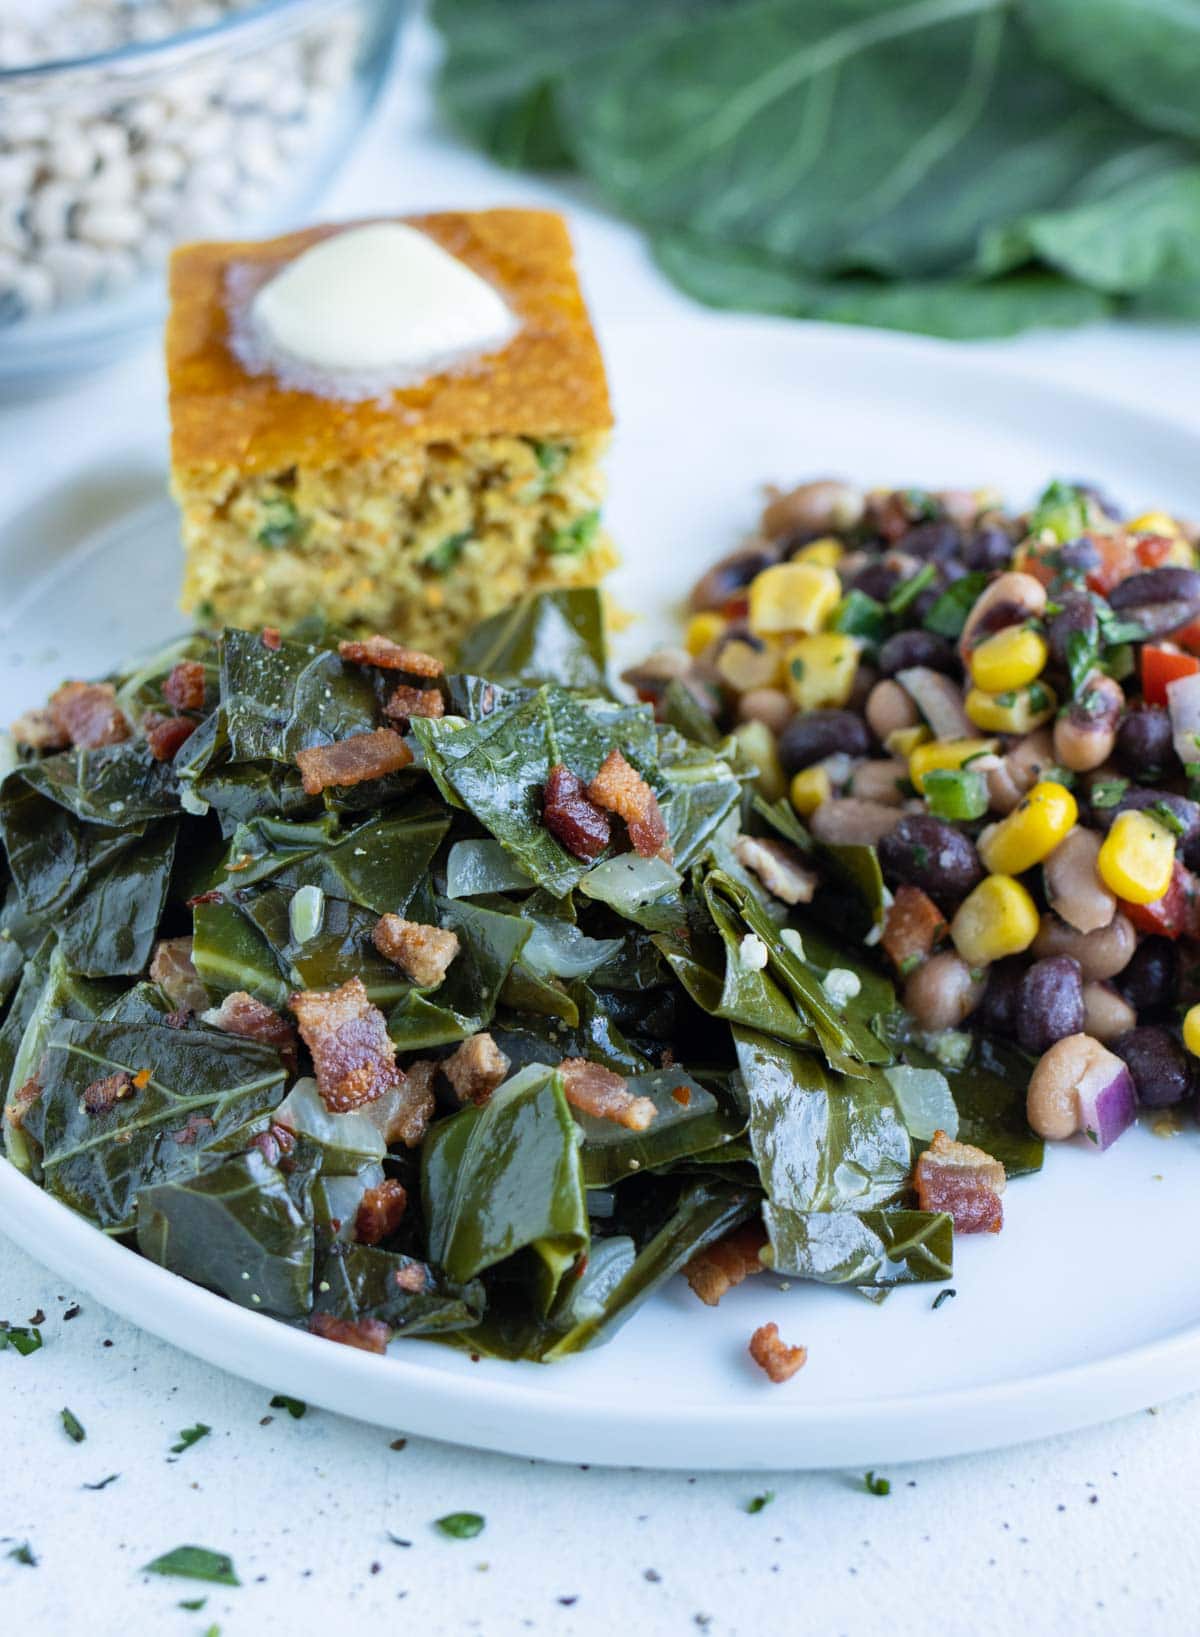 Southern collard greens are served on a plate.